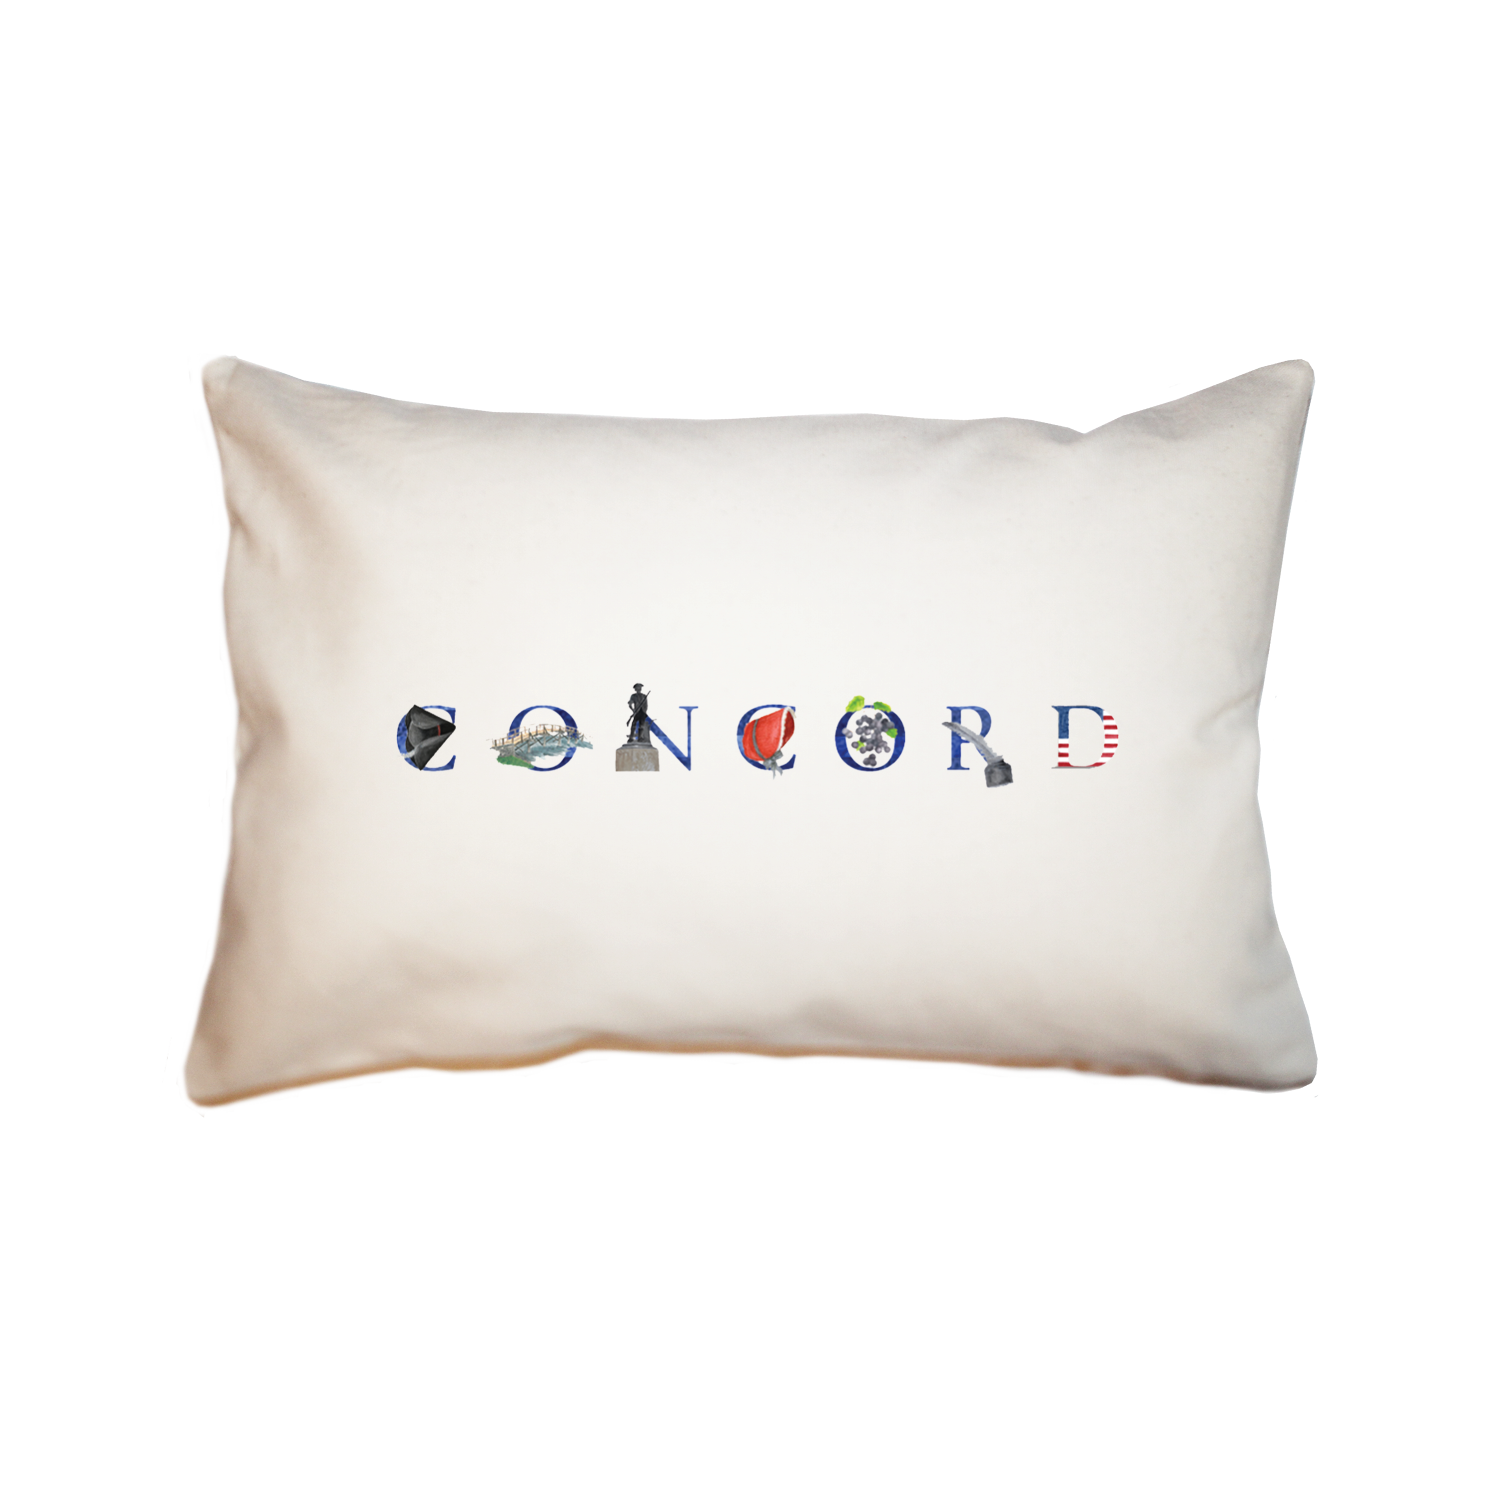 Concord large rectangle pillow